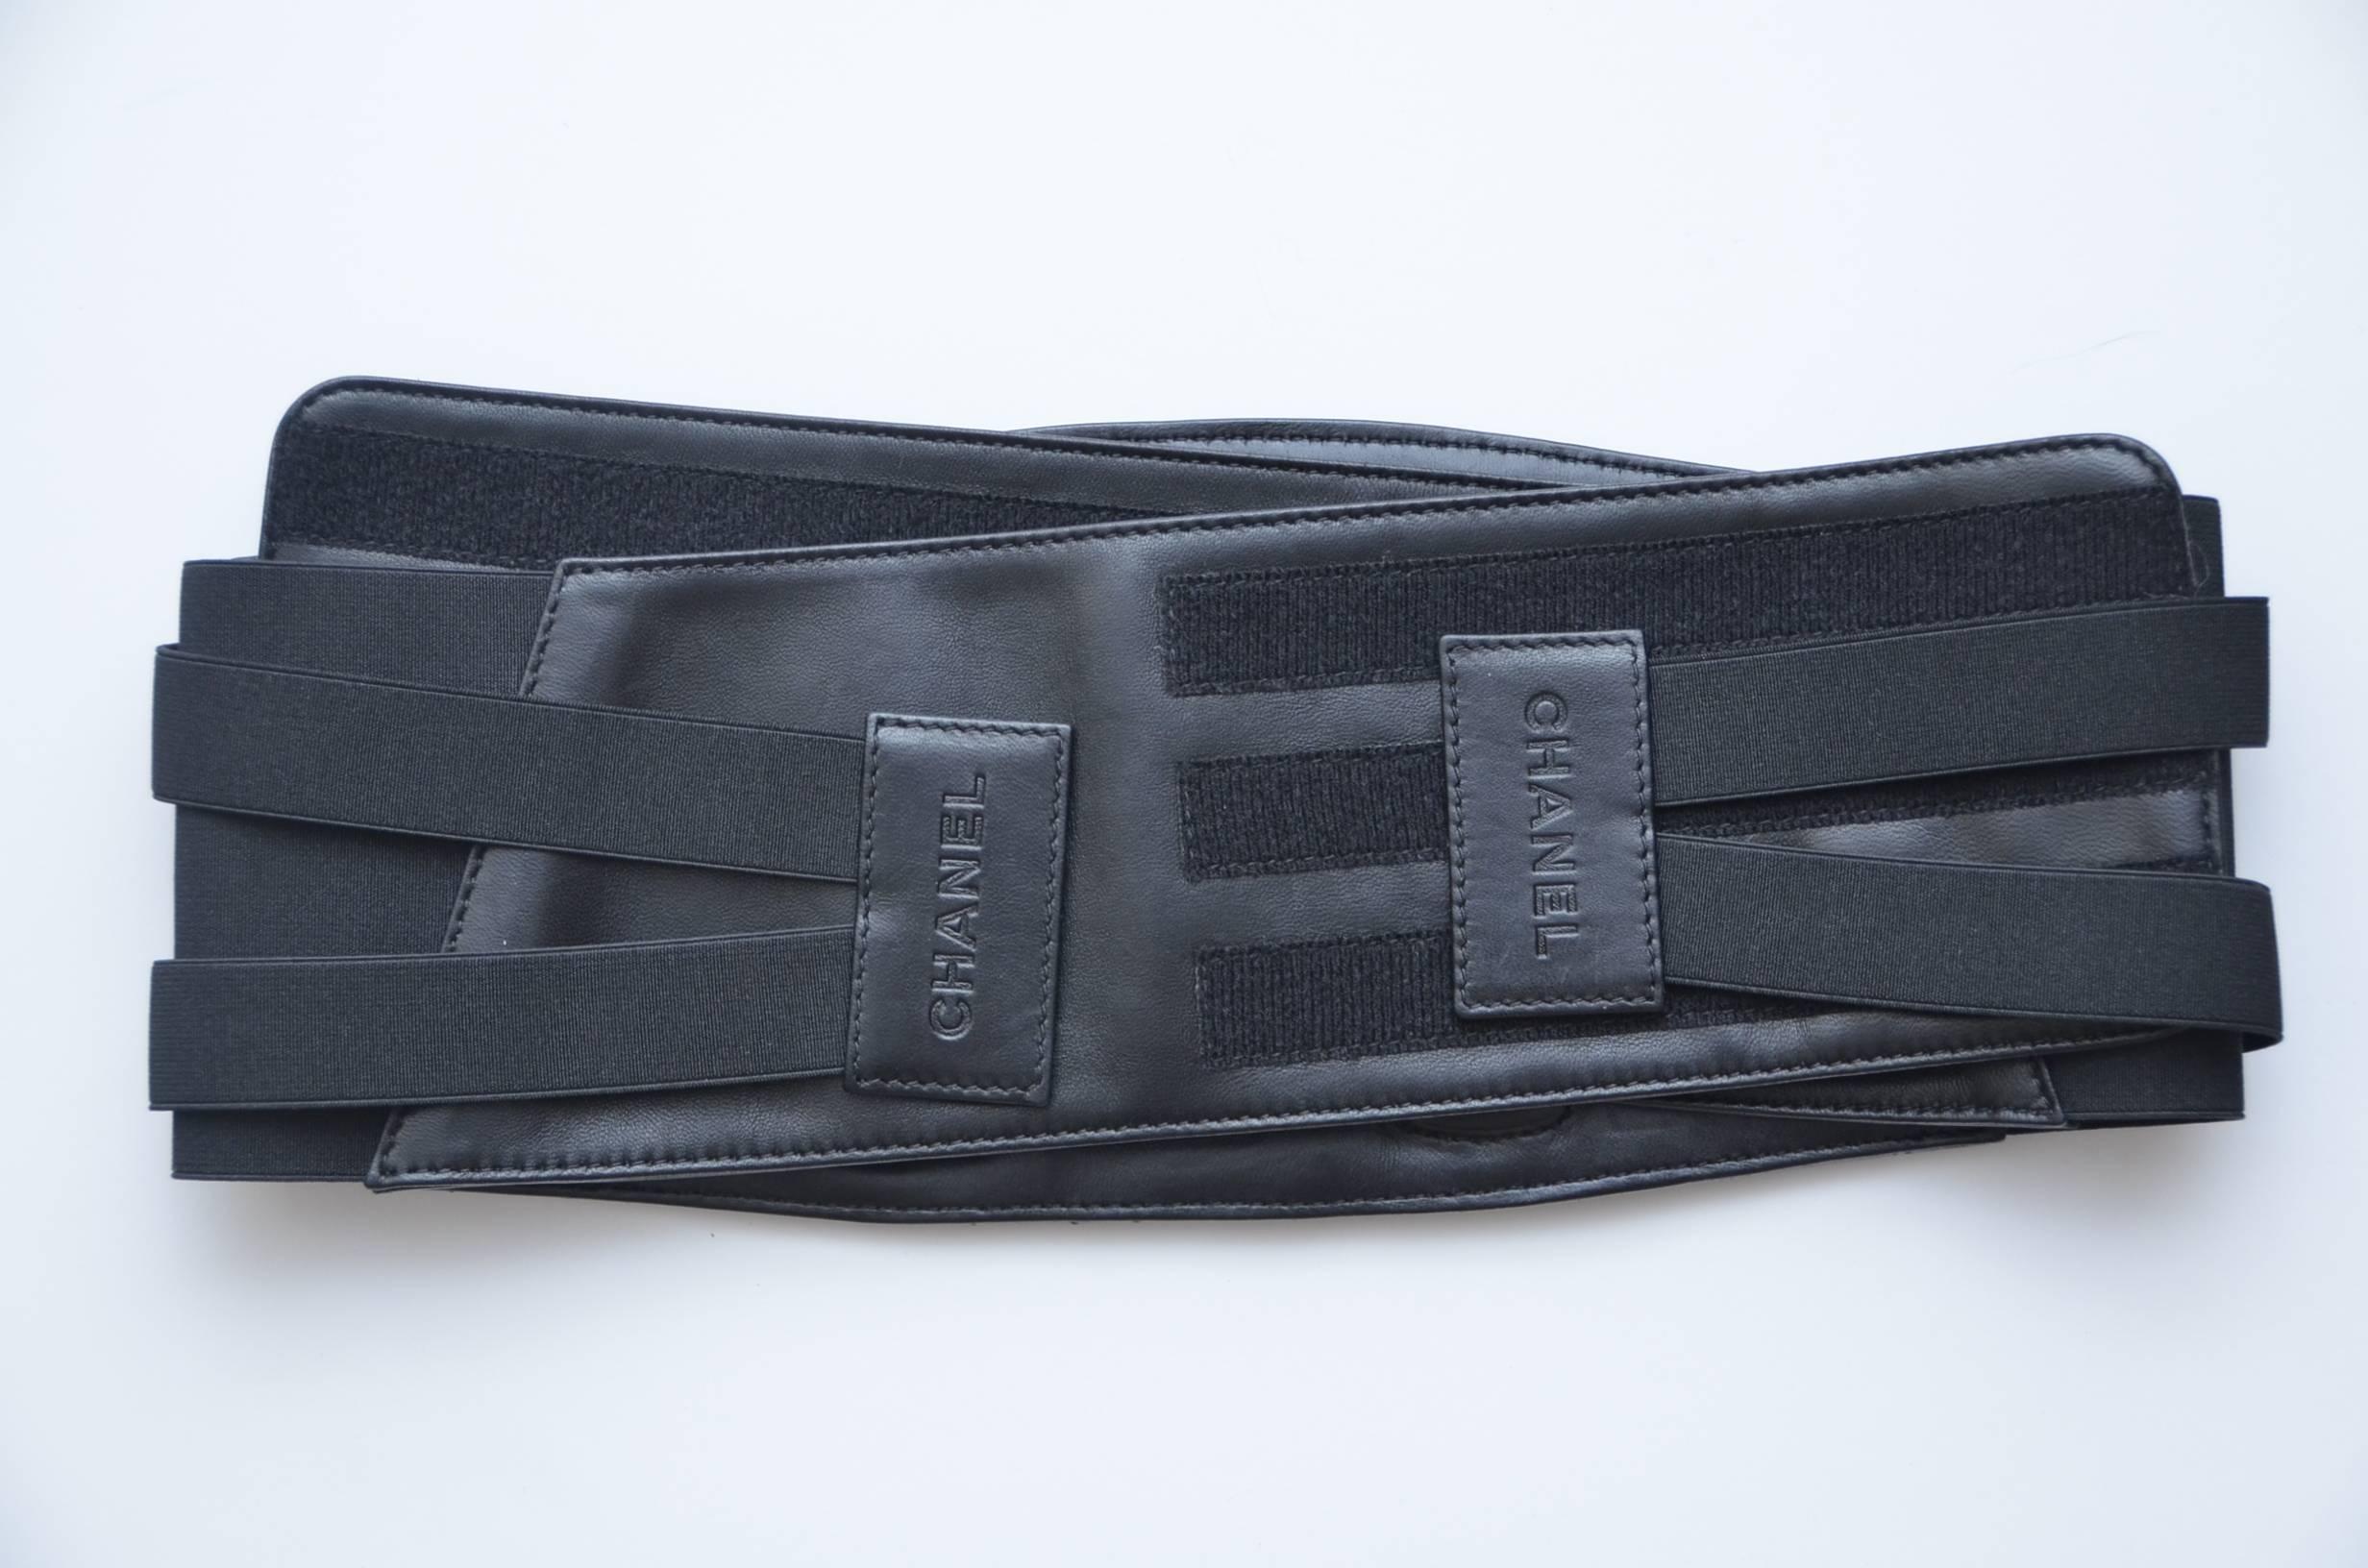 Chanel quilted lambskin leather belt.
New condition with couple scratches inside the belt.
Collection 2011.Size M.
Velcro closure .

FINAL SALE.

